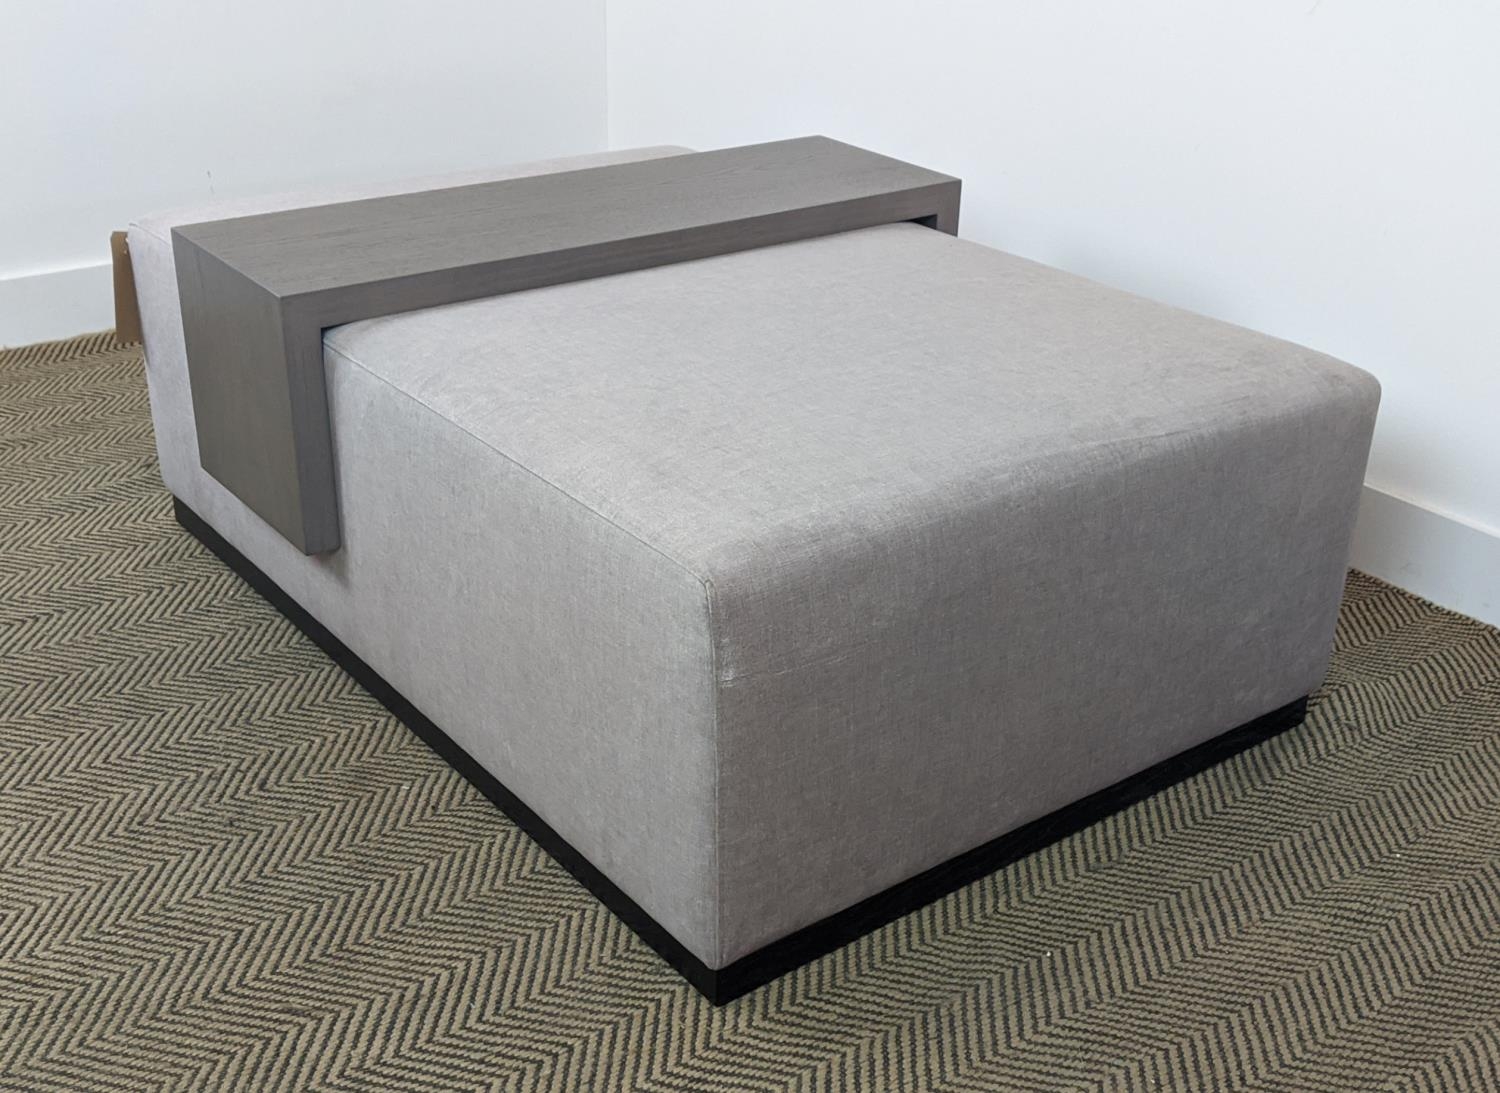 OTTOMAN, grey fabric upholstered, with wooden table that fits over, 120cm x 80cm x 40cm. - Bild 3 aus 6